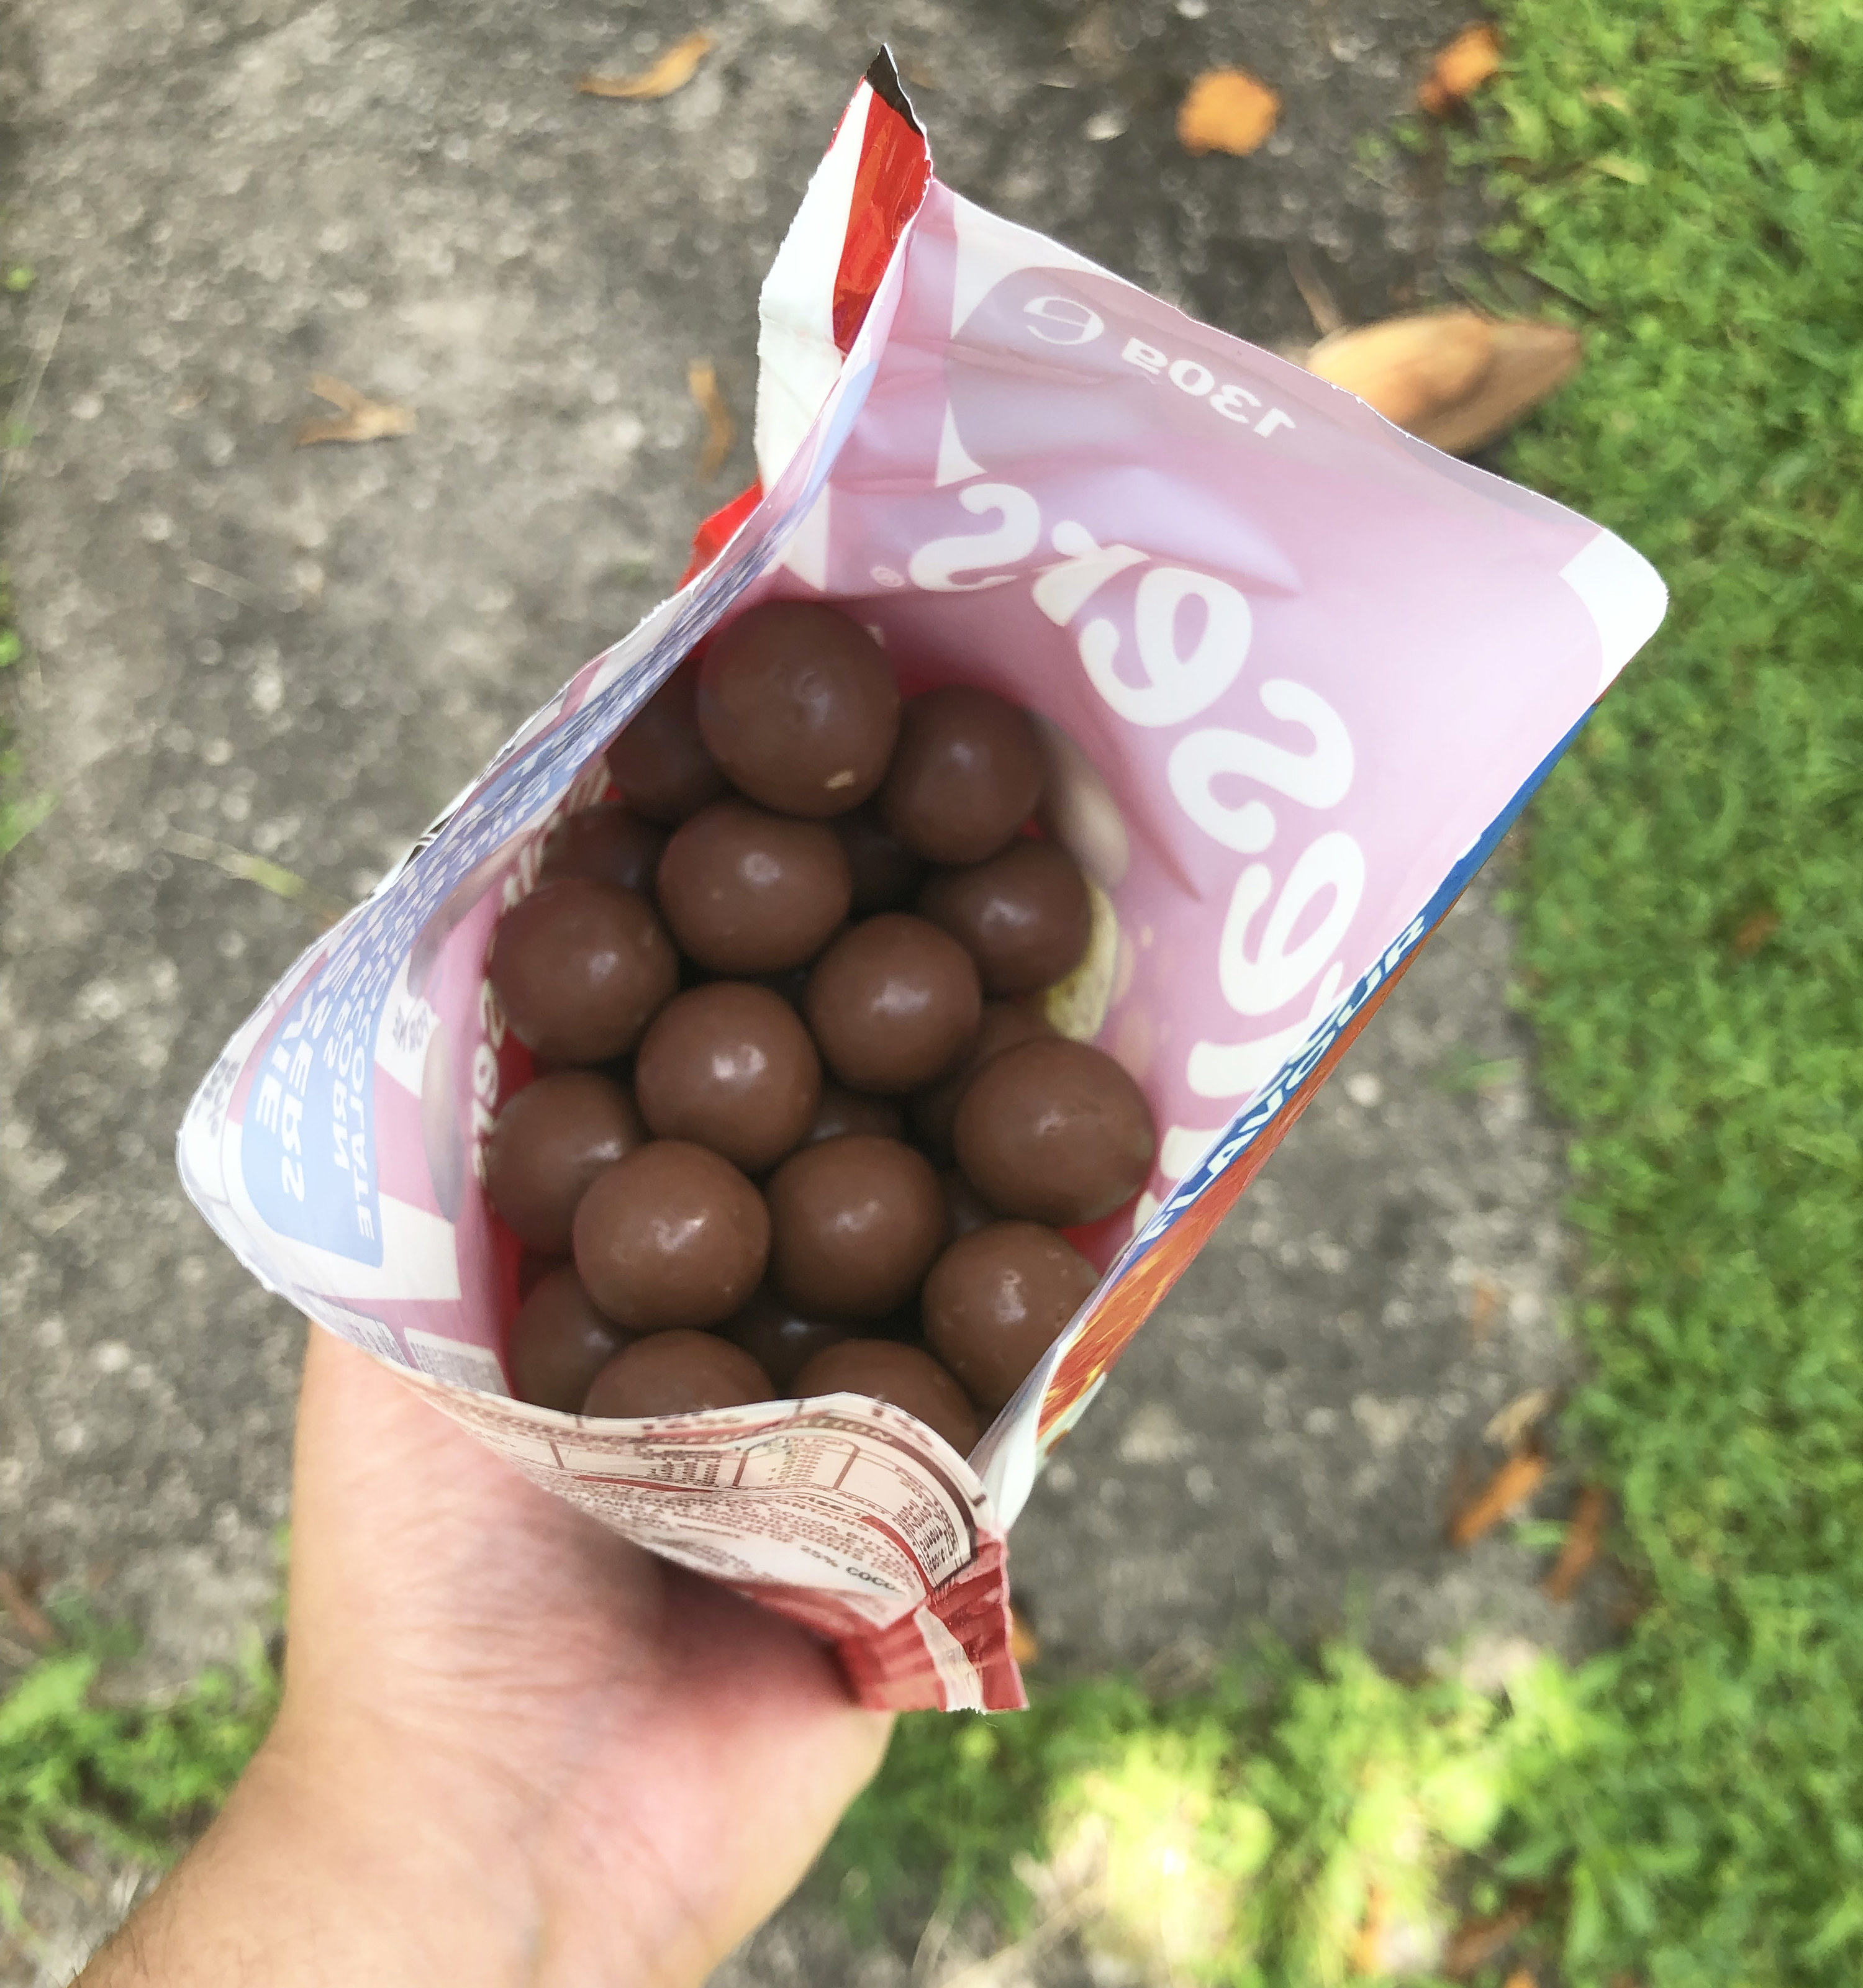 A close up look at the inside of the popcorn flavour Maltesers in their bag